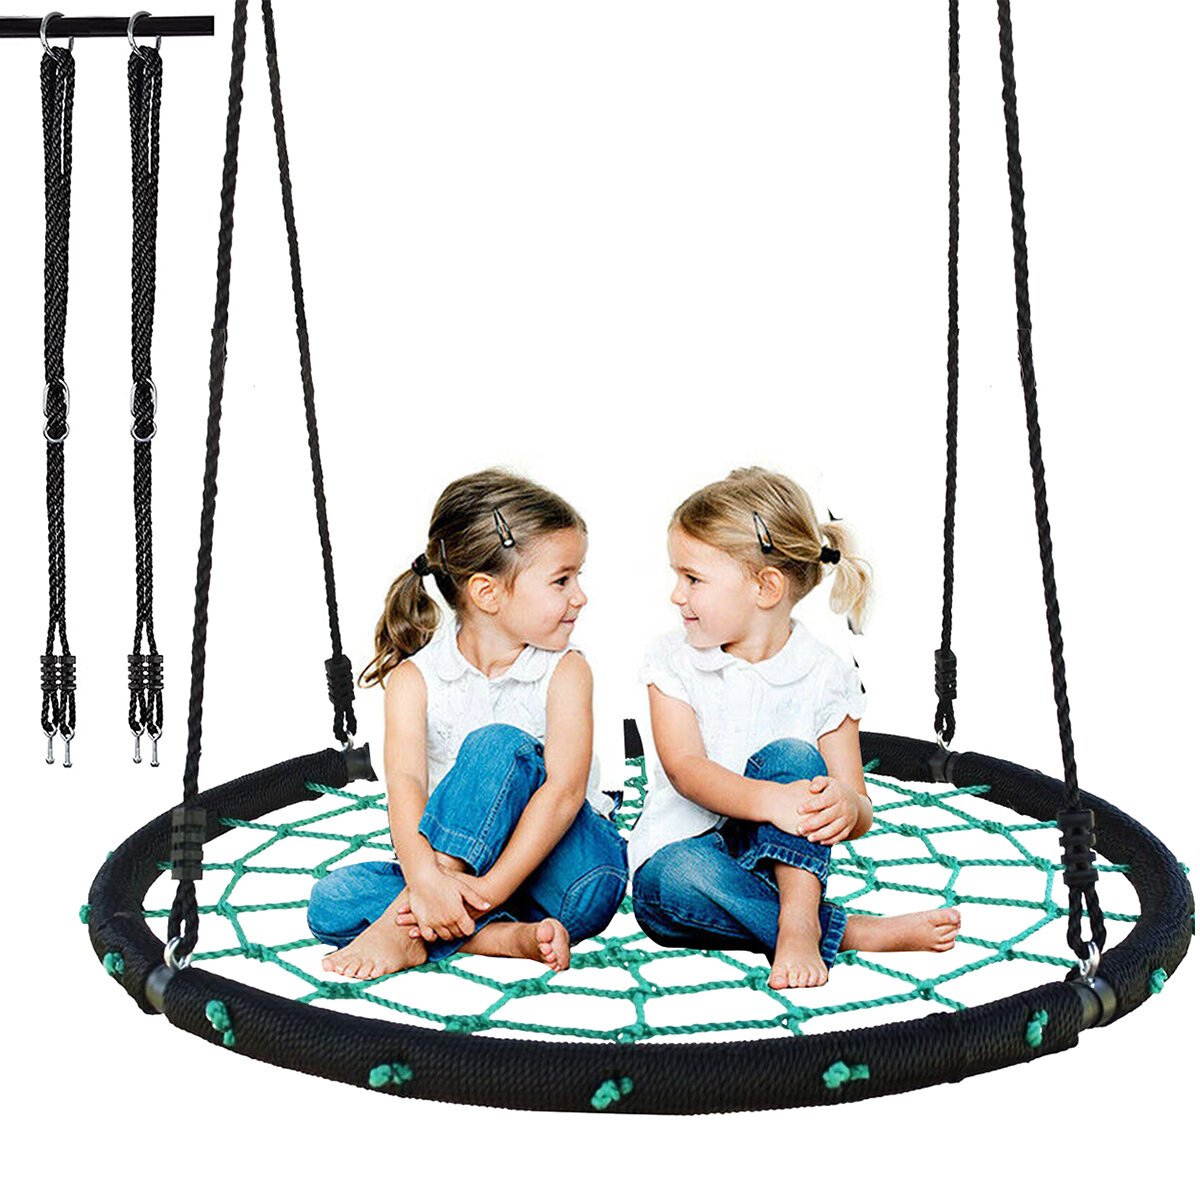 40/43 Inch Swing Outdoor Children Entertainment Round Toy Swing Sturdy Garden Patio Swing Durable Hanging Chair